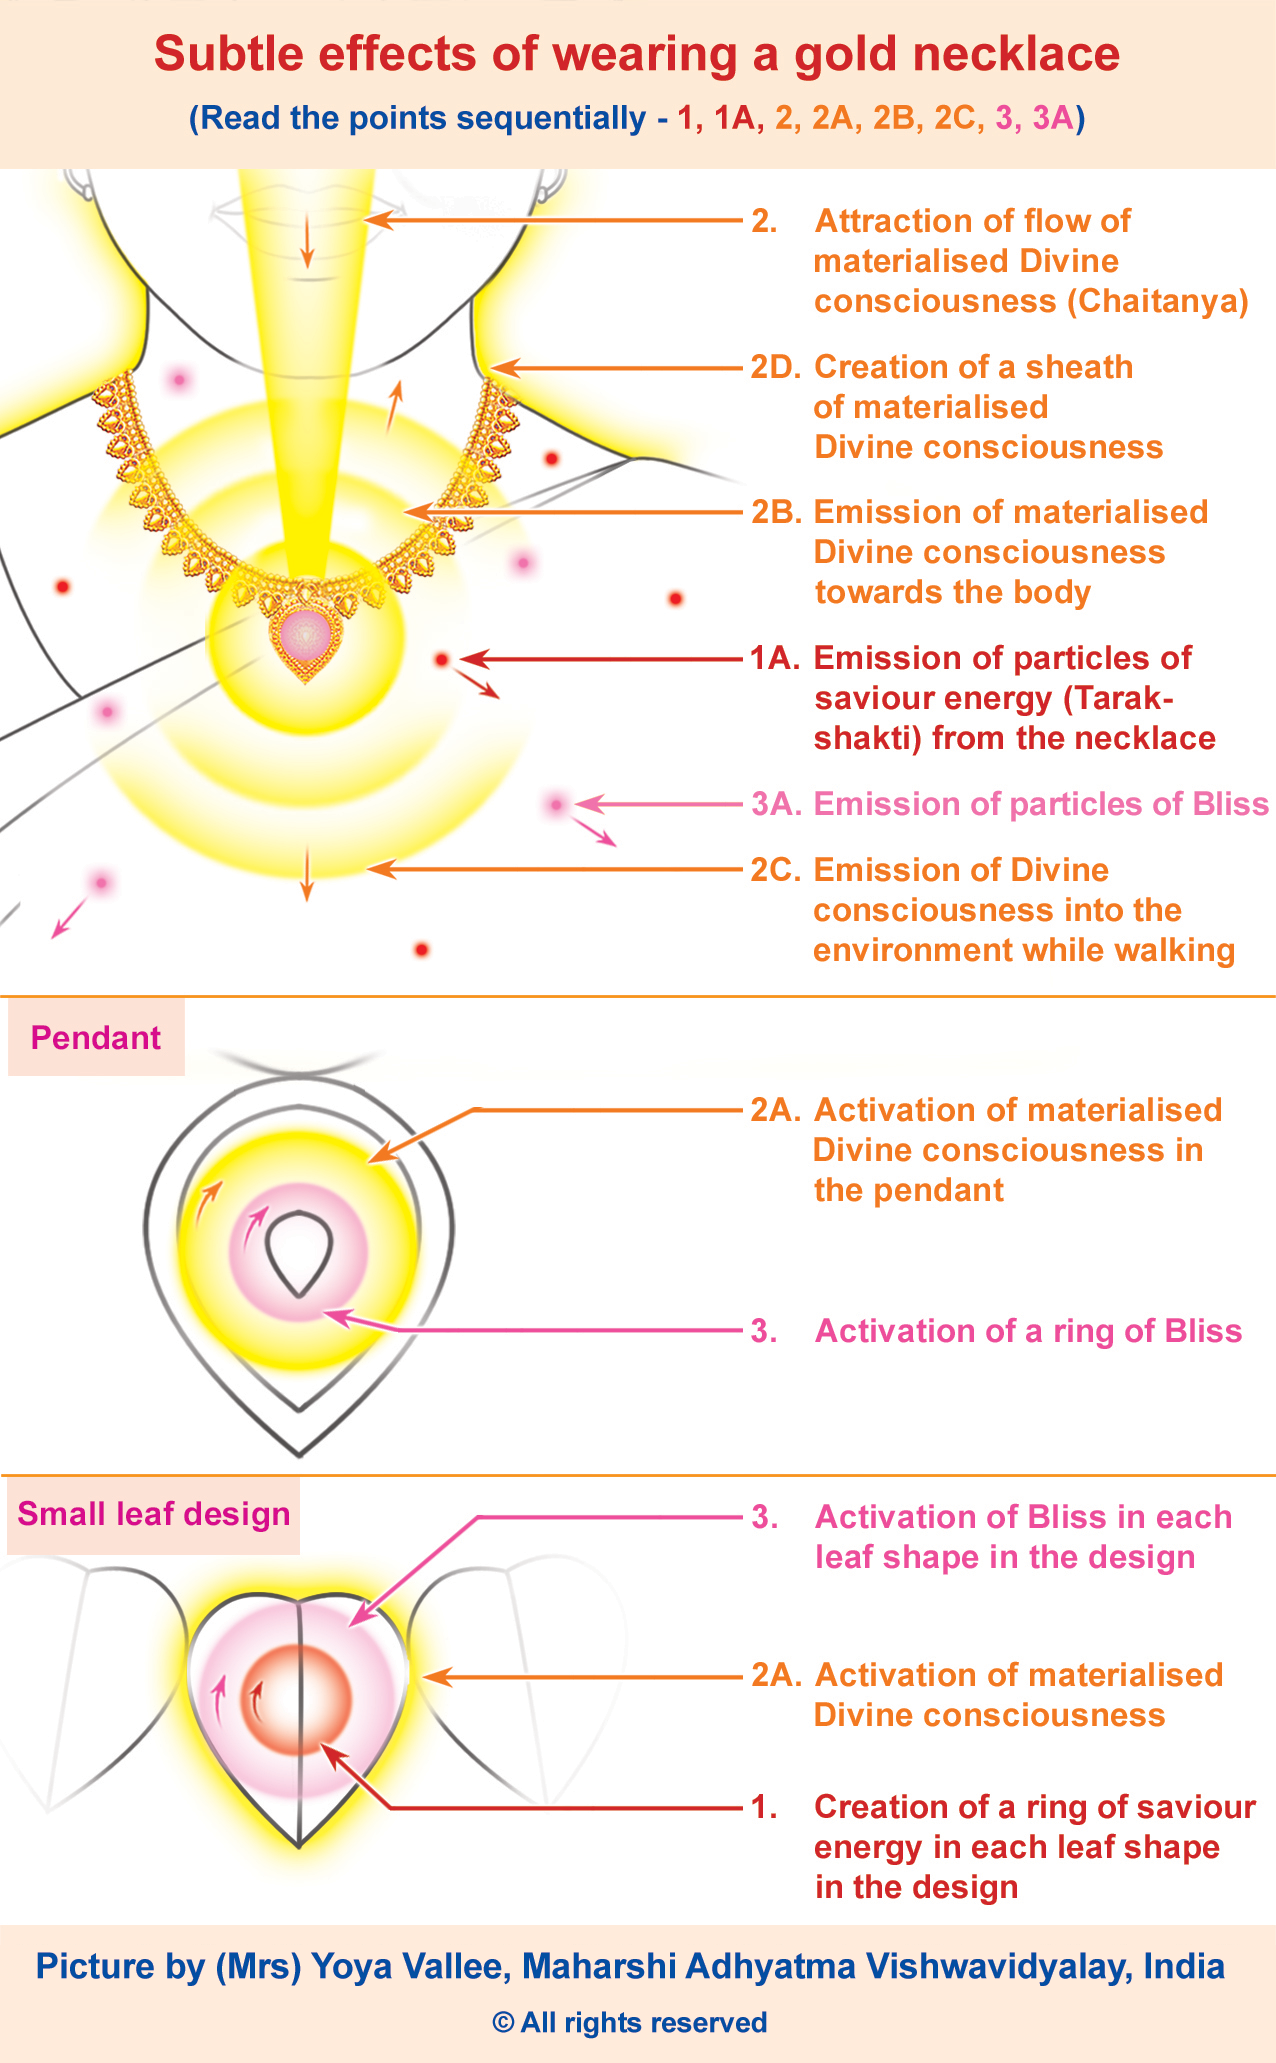 How jewellery can affect your aura